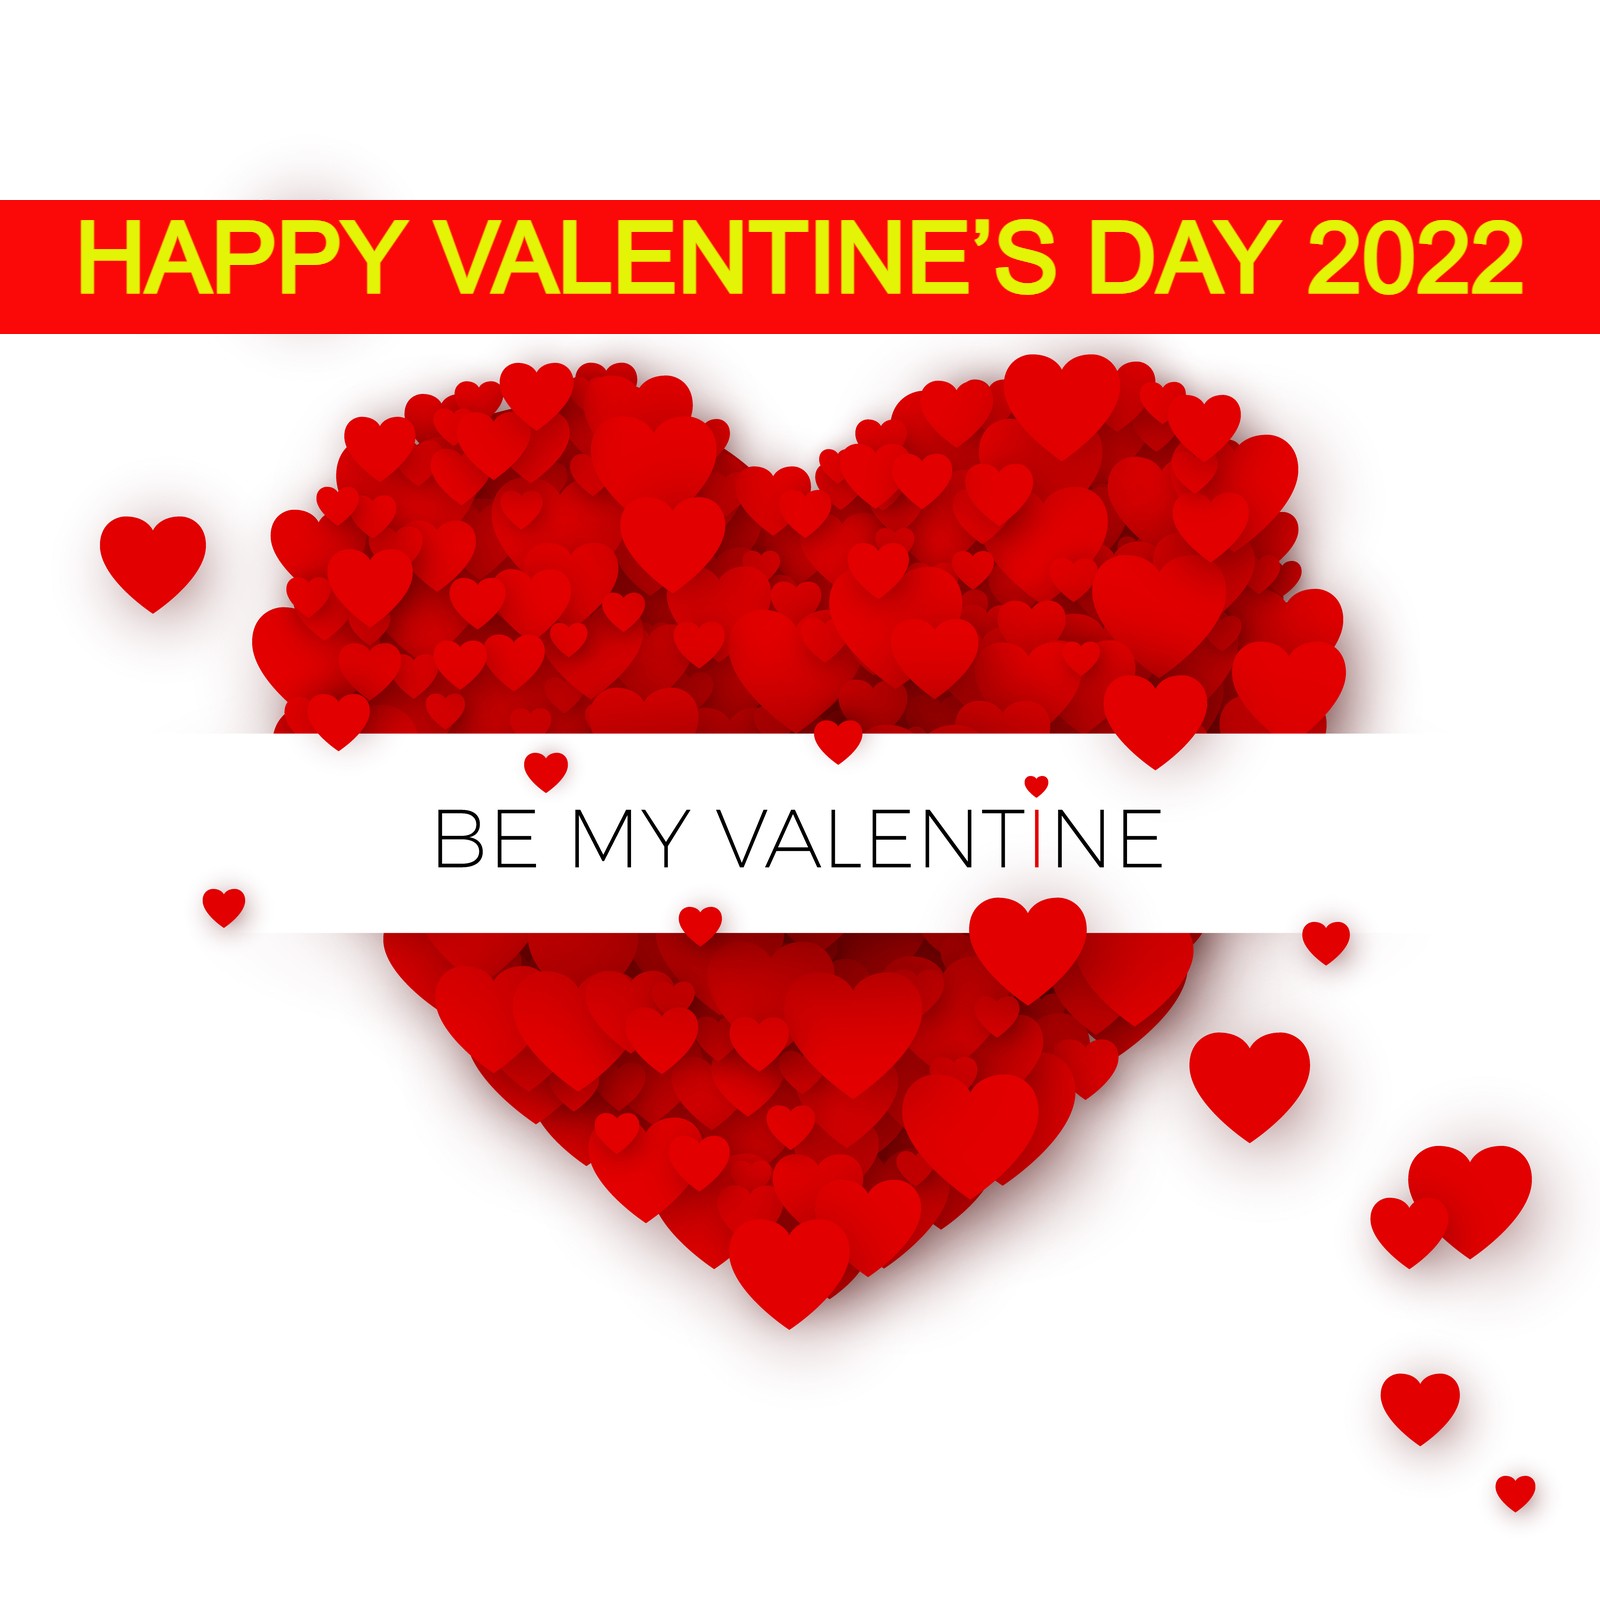 Happy Valentine's Day 2022: Wishes, Images, Quotes, Shayari, Messages and  WhatsApp Greetings to Share on Day of Love